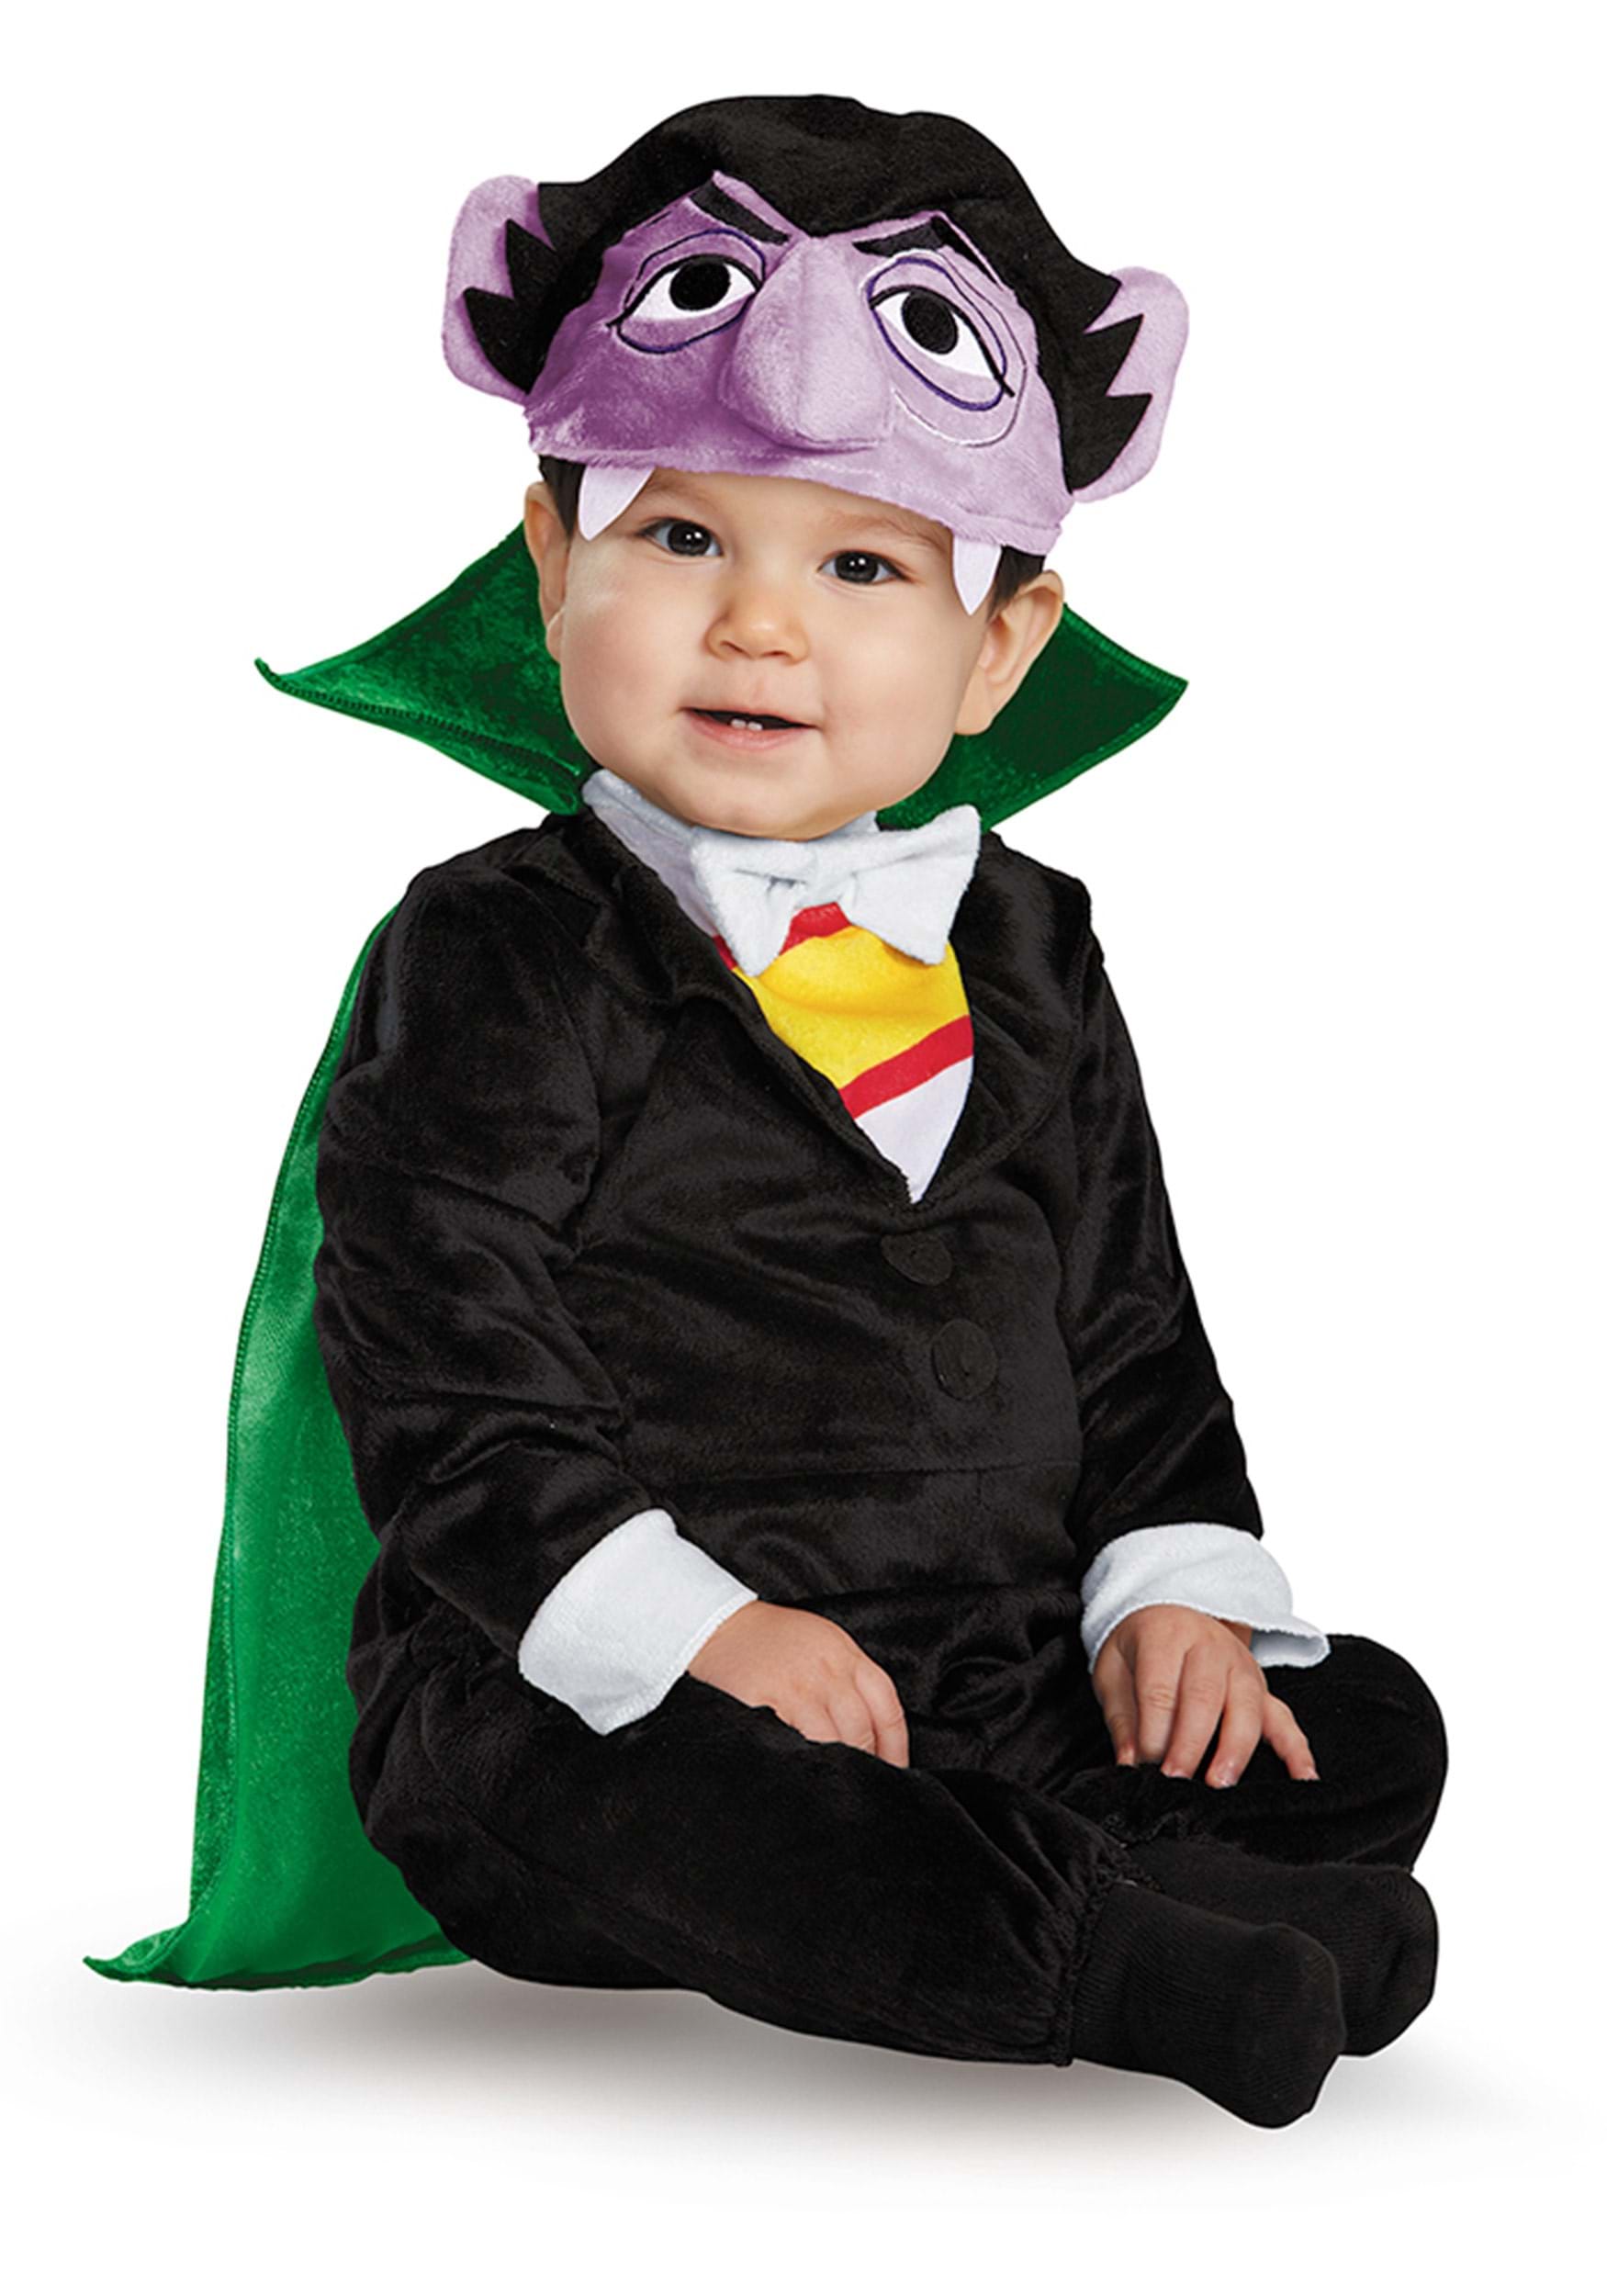 Photos - Fancy Dress Sesame Street Disguise  Infant/Toddler Deluxe Count Costume Black/Green 